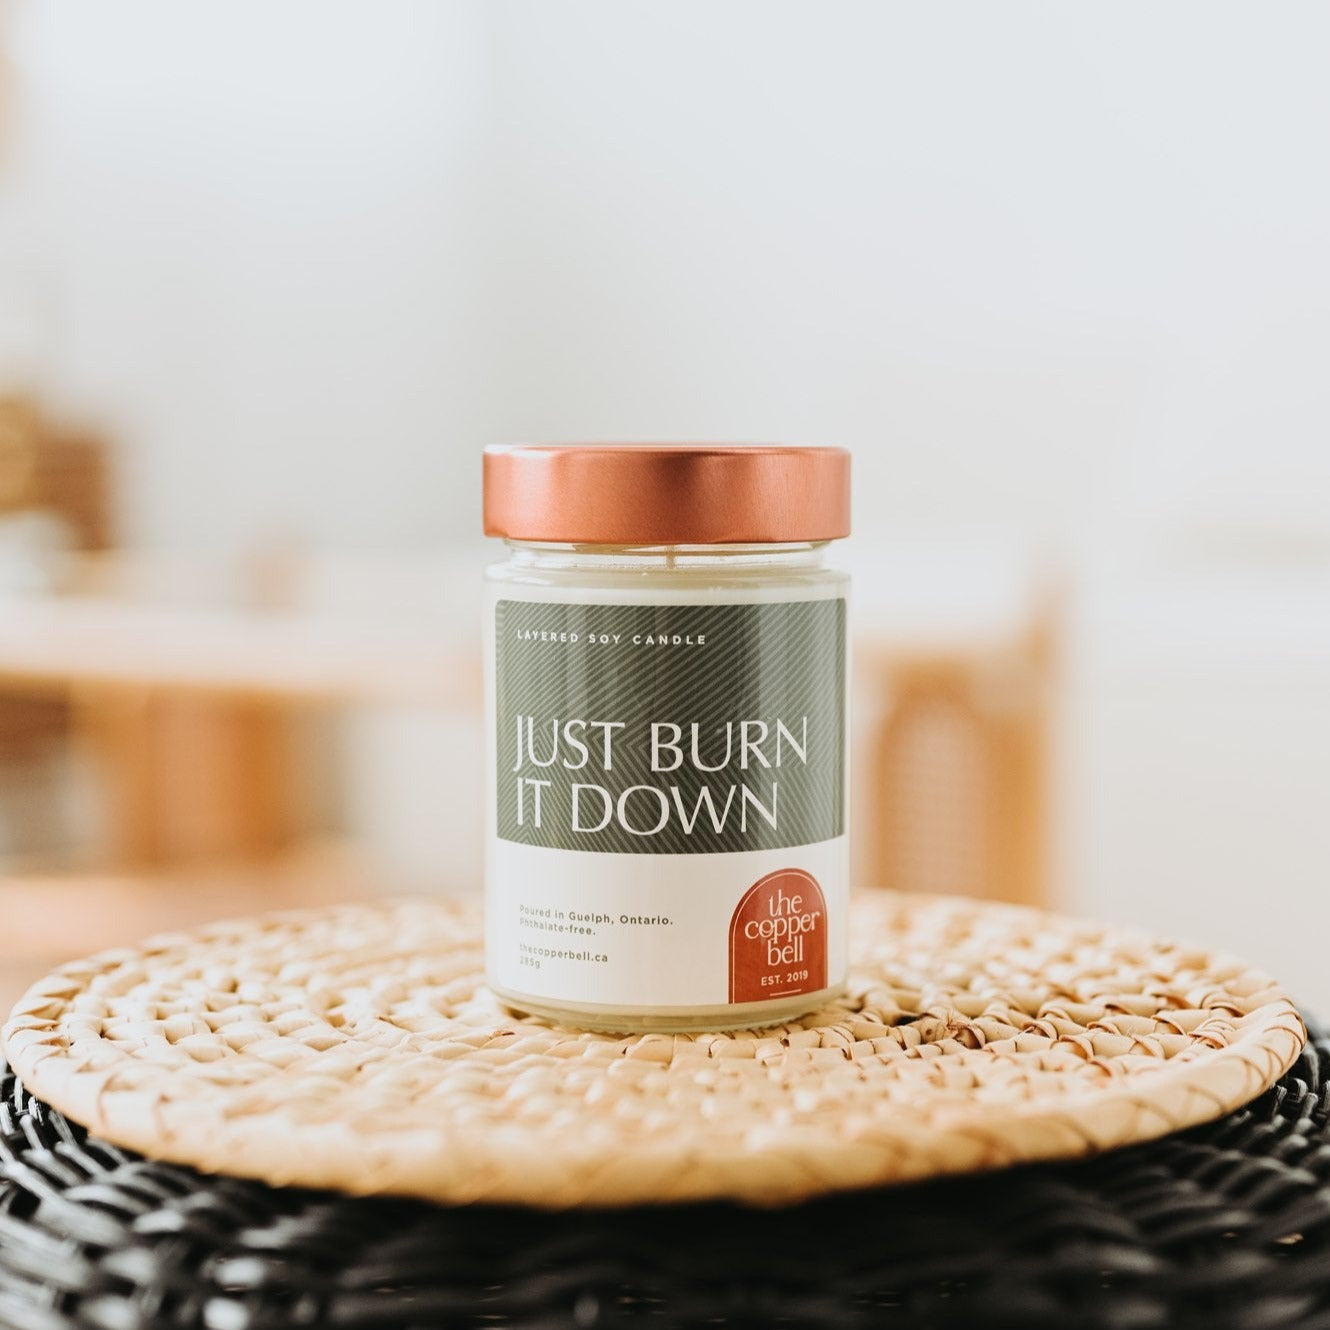 just burn it down funny soy candle. for the times you just want to burn the world down, light a candle instead. layered soy candle displayed on a wicker basket